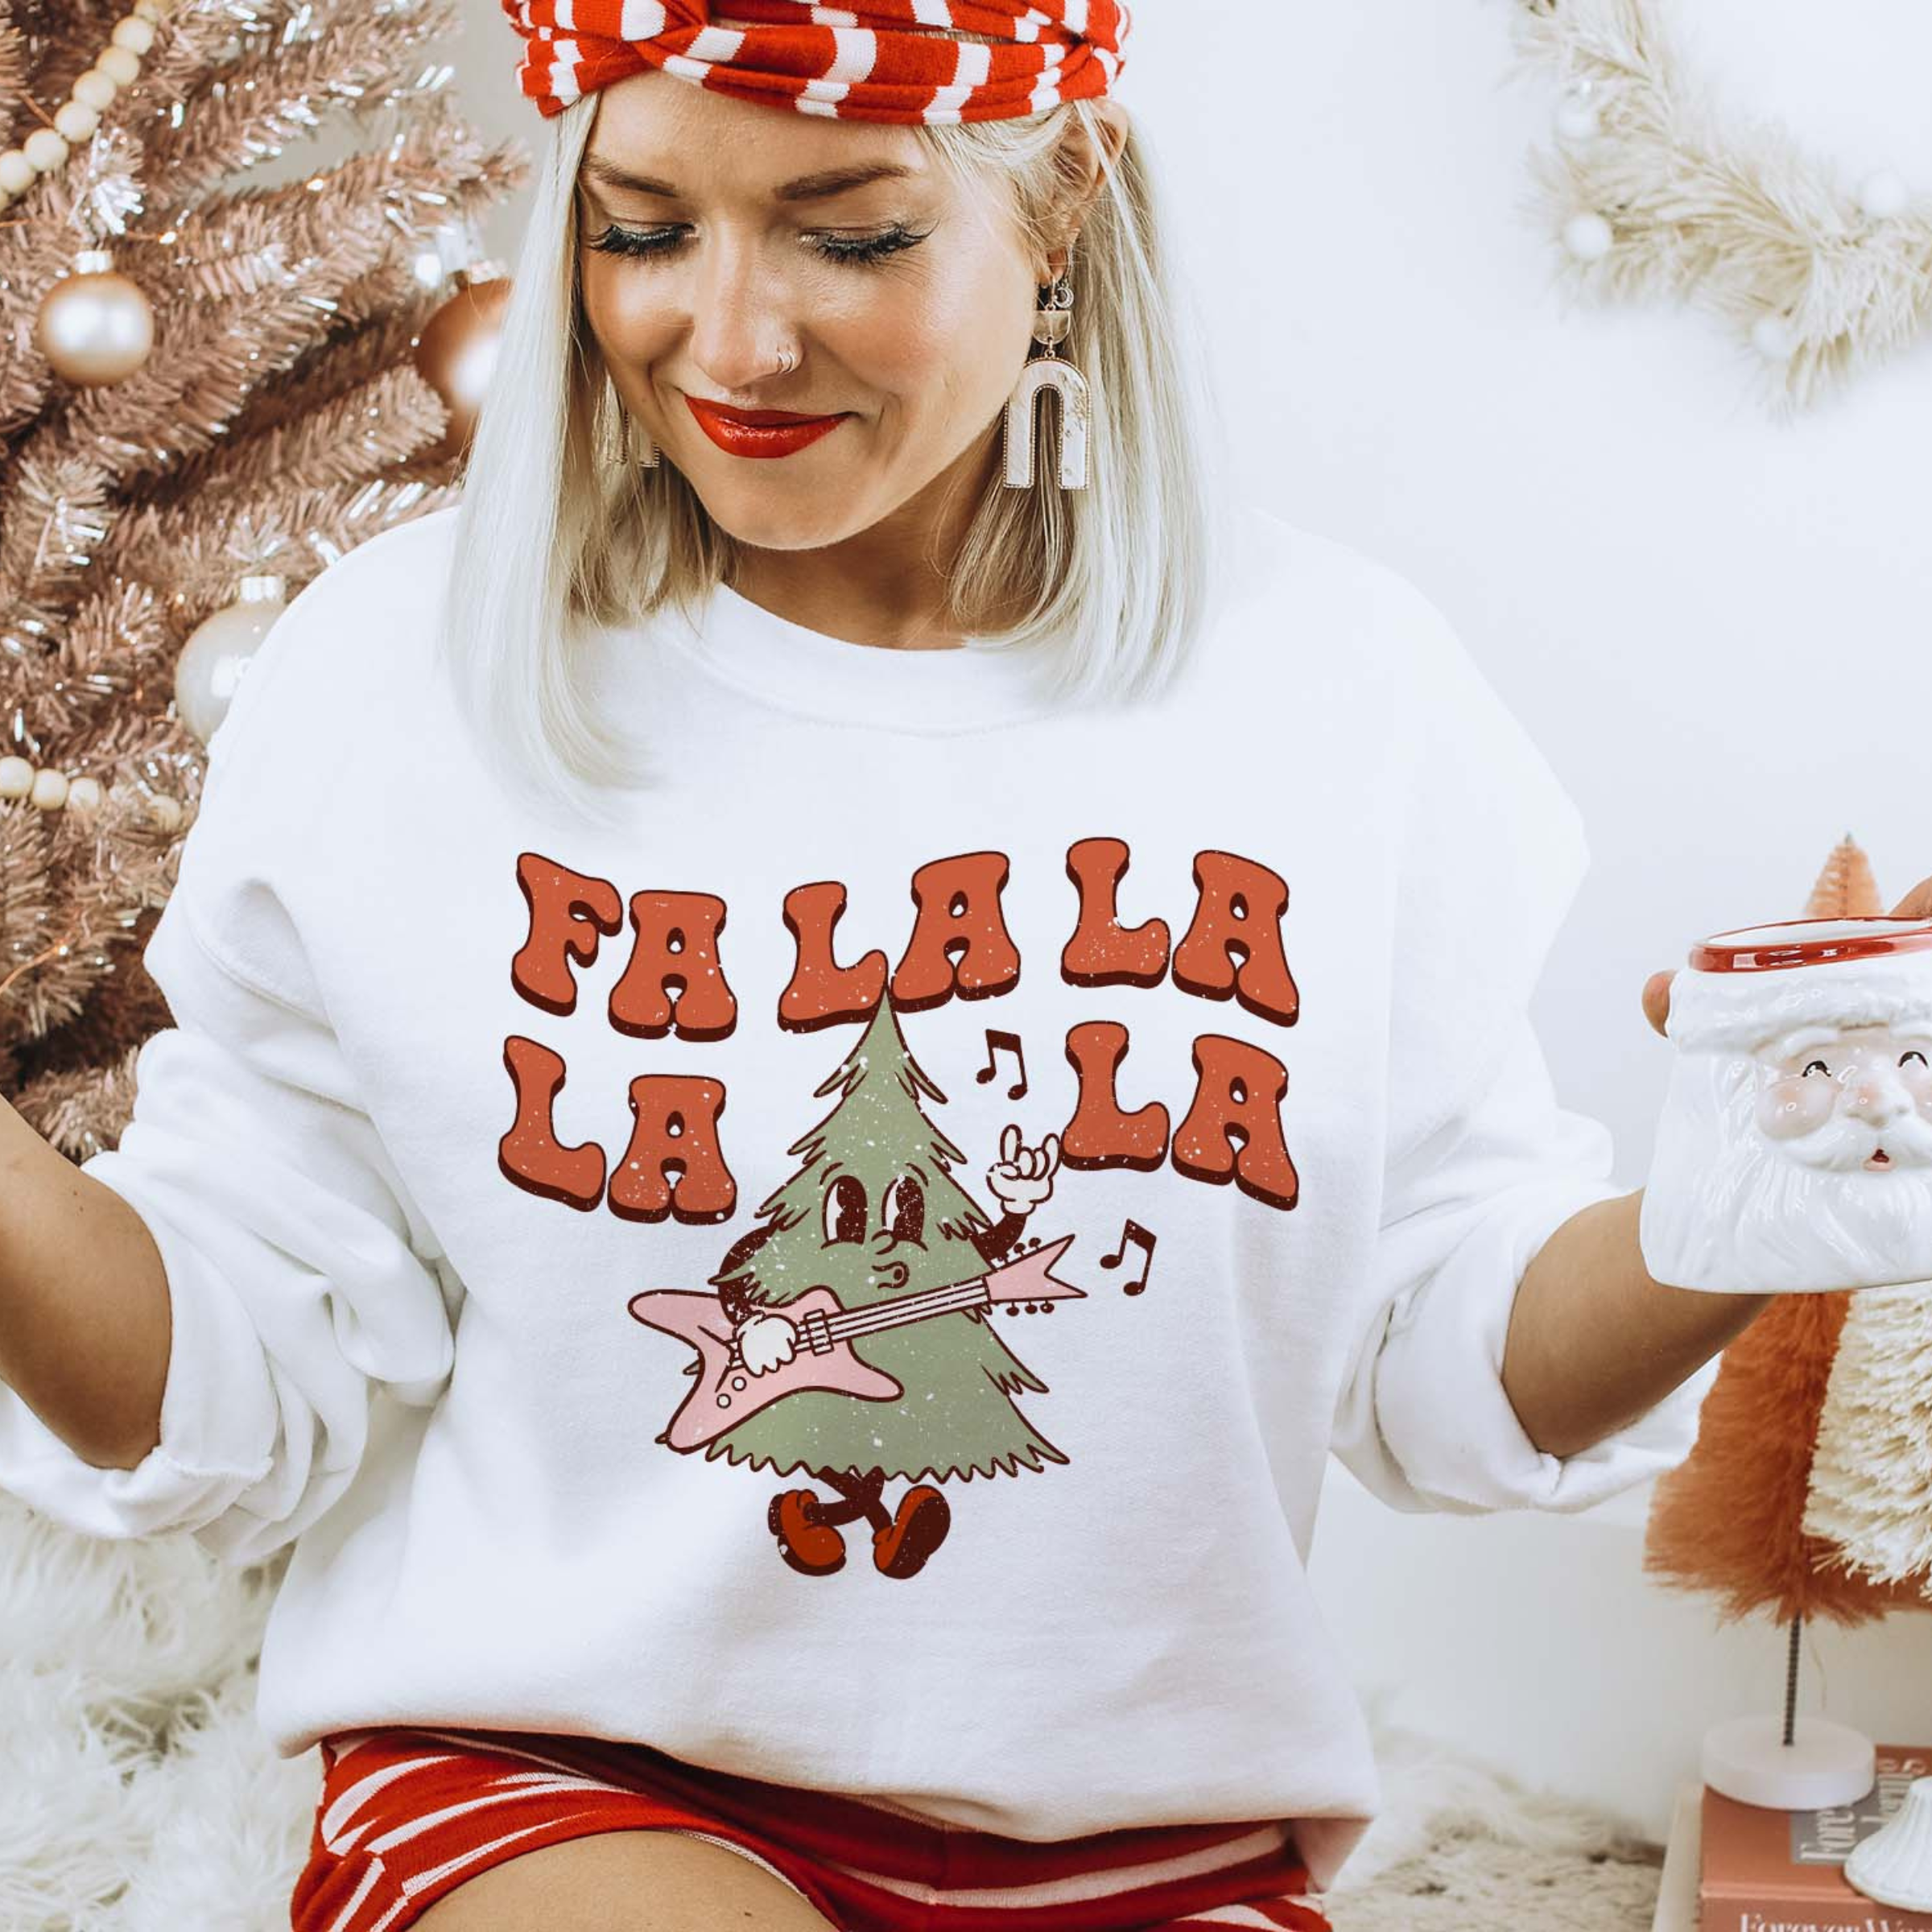 This white sweatshirt includes a crew neckline, long sleeves, and a graphic that says "Fa La La La La" in a cute font with a Christmas Tree playing a guitar and throwing up a rock on hand symbol. This sweatshirt is being modeled with a red and white striped headband, white earrings, and a pair of red and white striped shorts. The model has also rolled the sleeves of the sweatshirt and is holding a Santa Clause mug. 